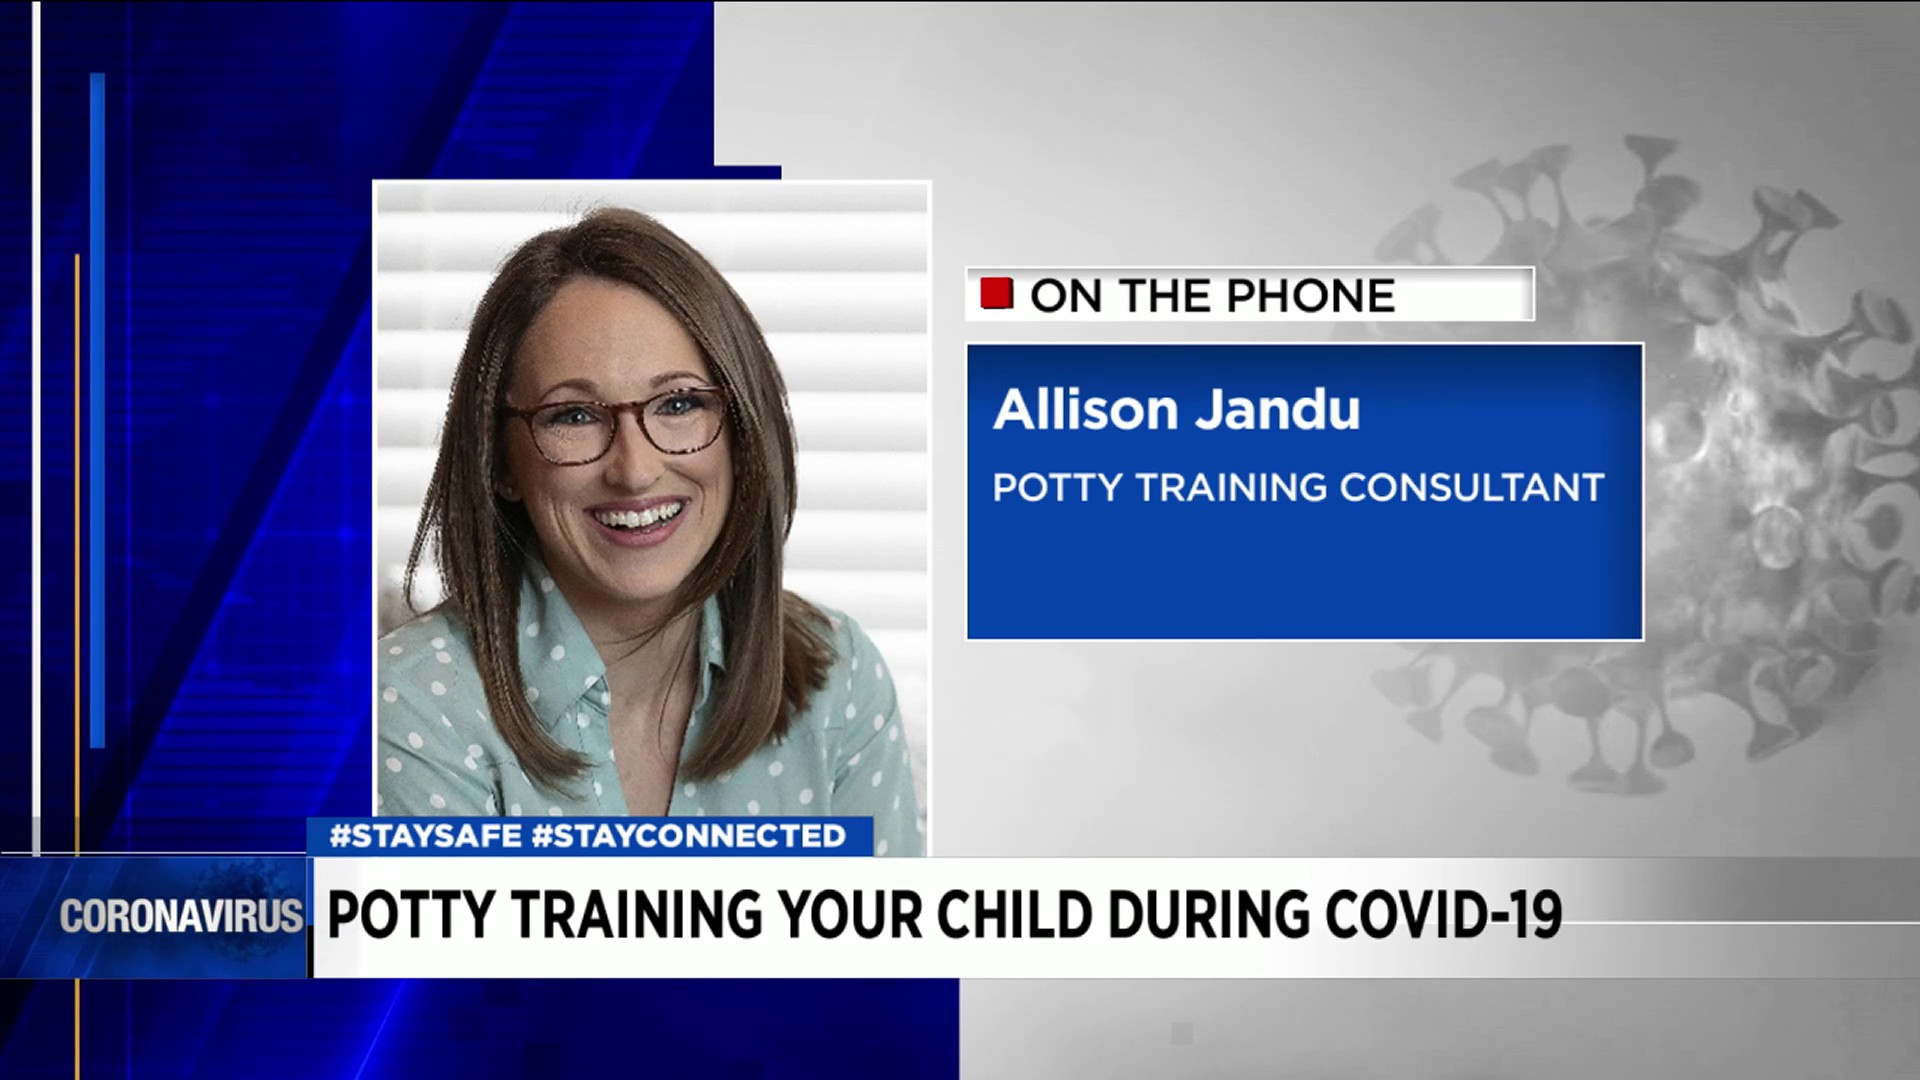 Potty training your child during COVID-19